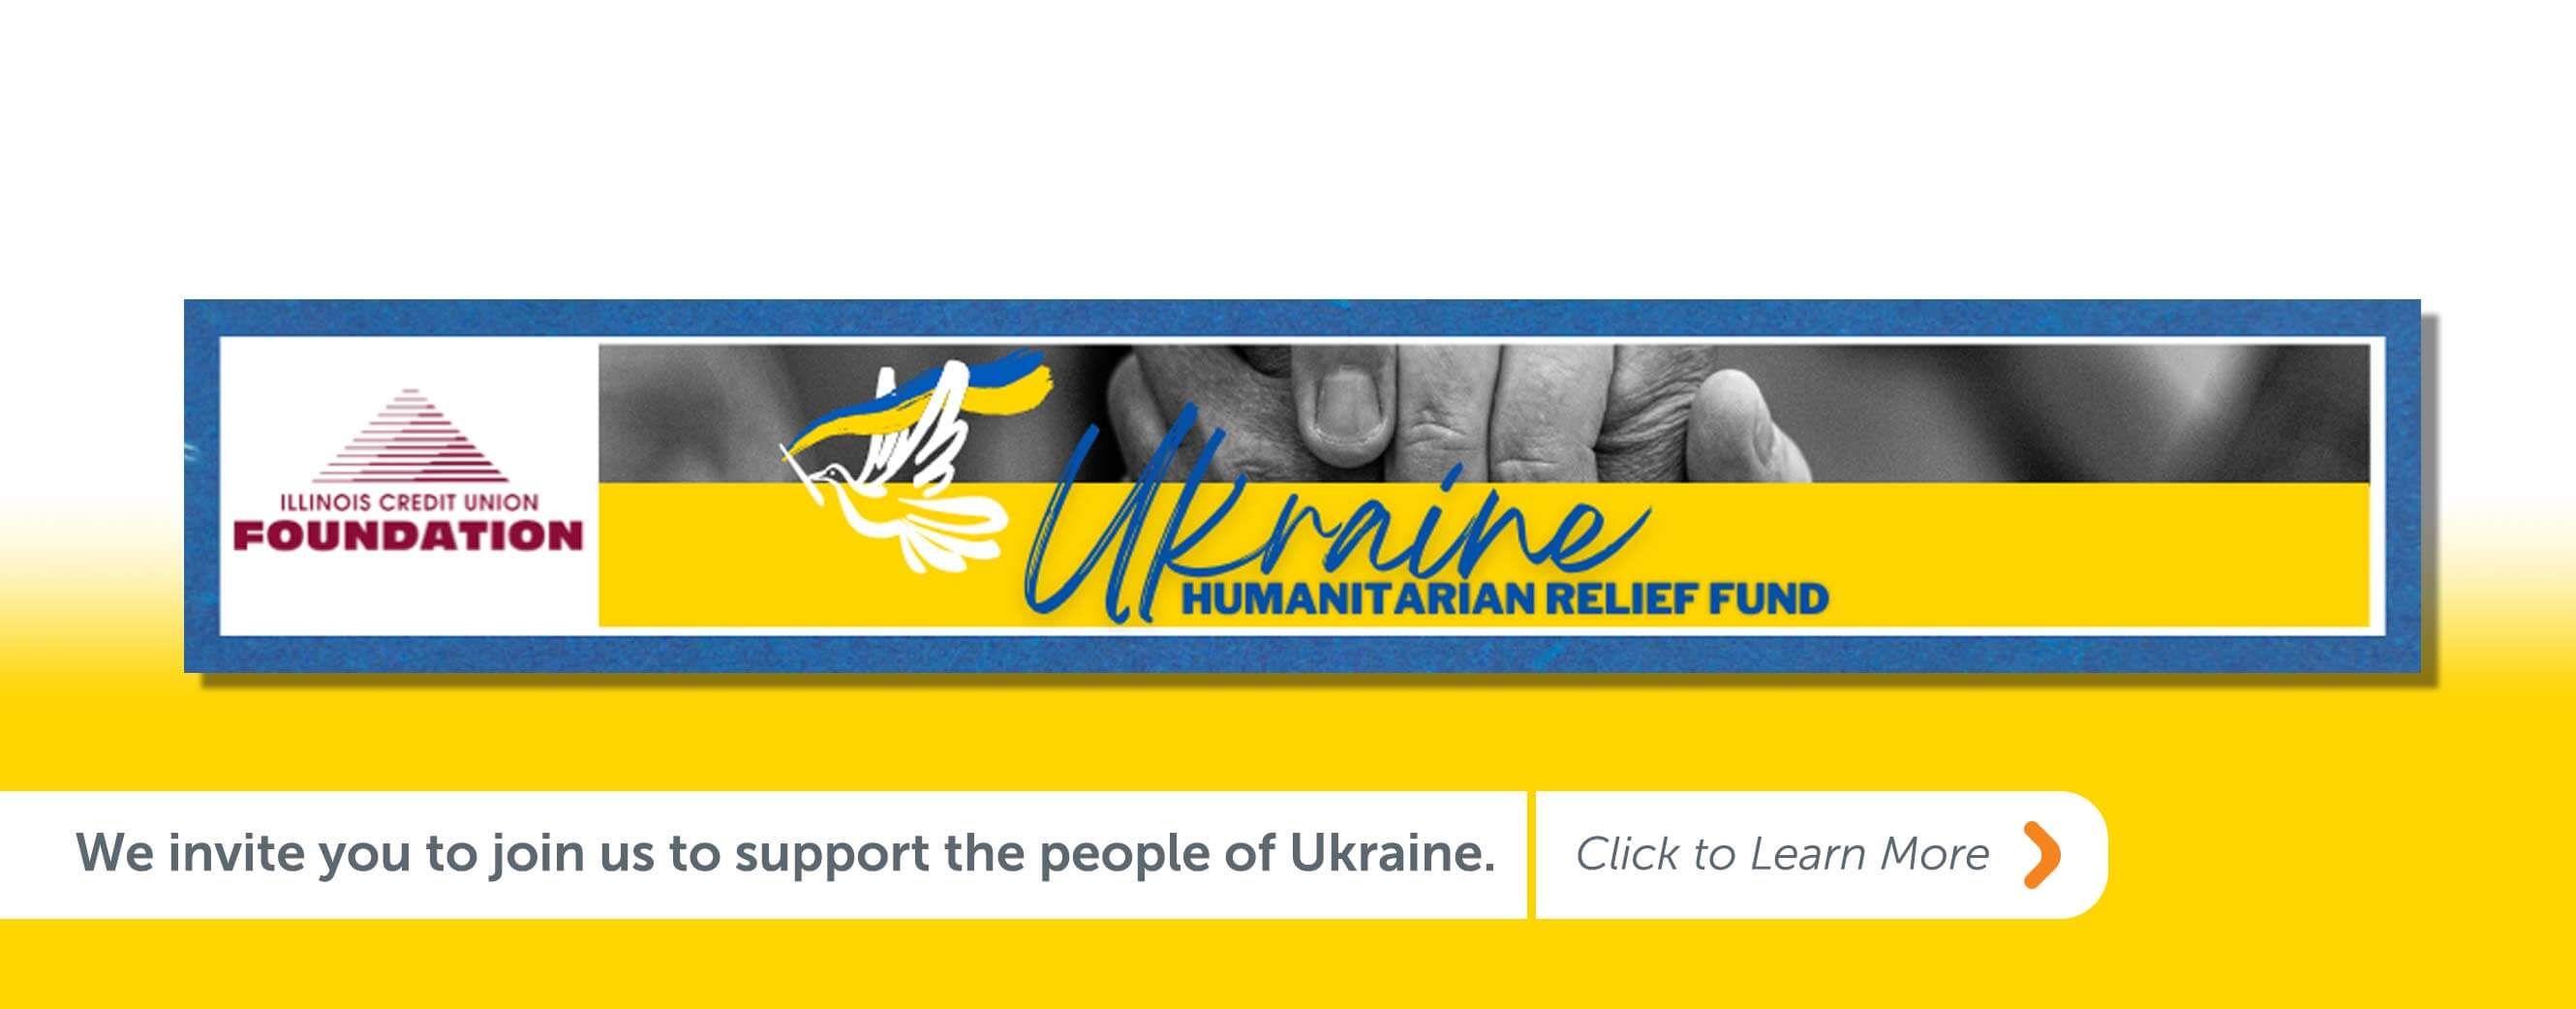 We invite you to join us to support the people of Ukraine. Click to learn more!